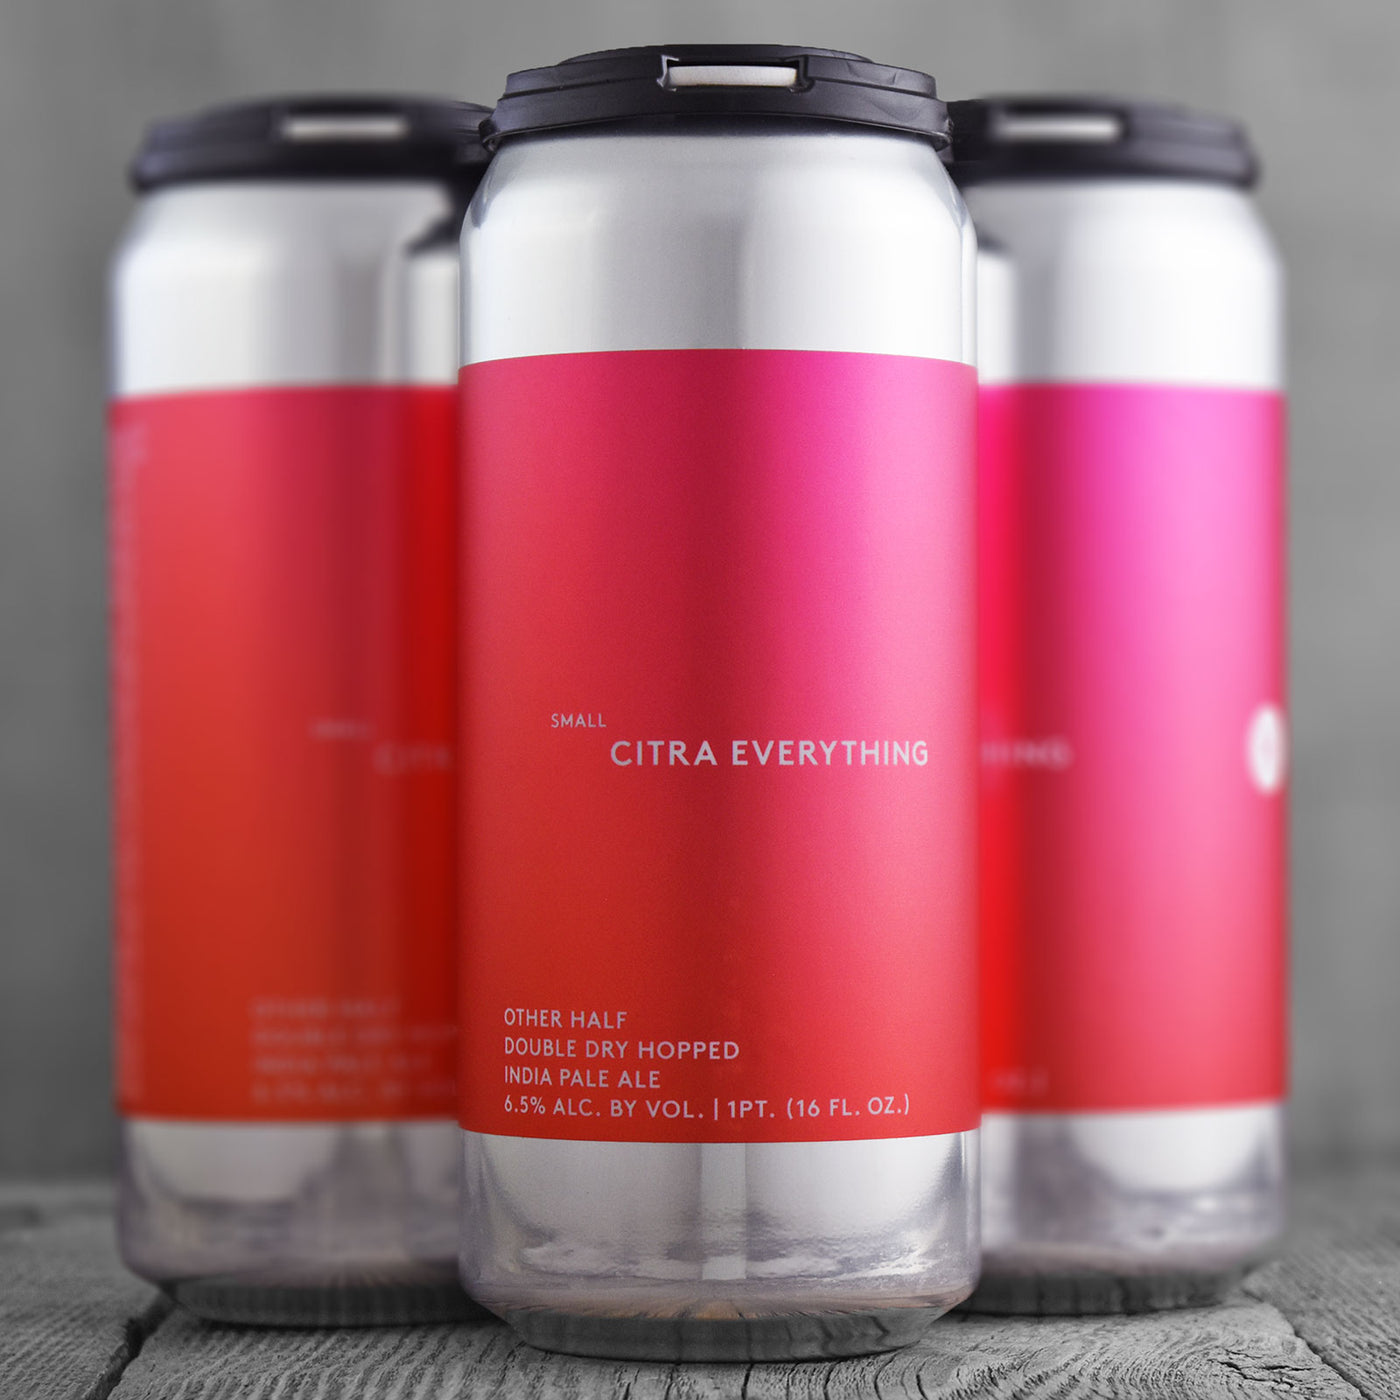 Other Half DDH Small Citra Everything - Limit 2